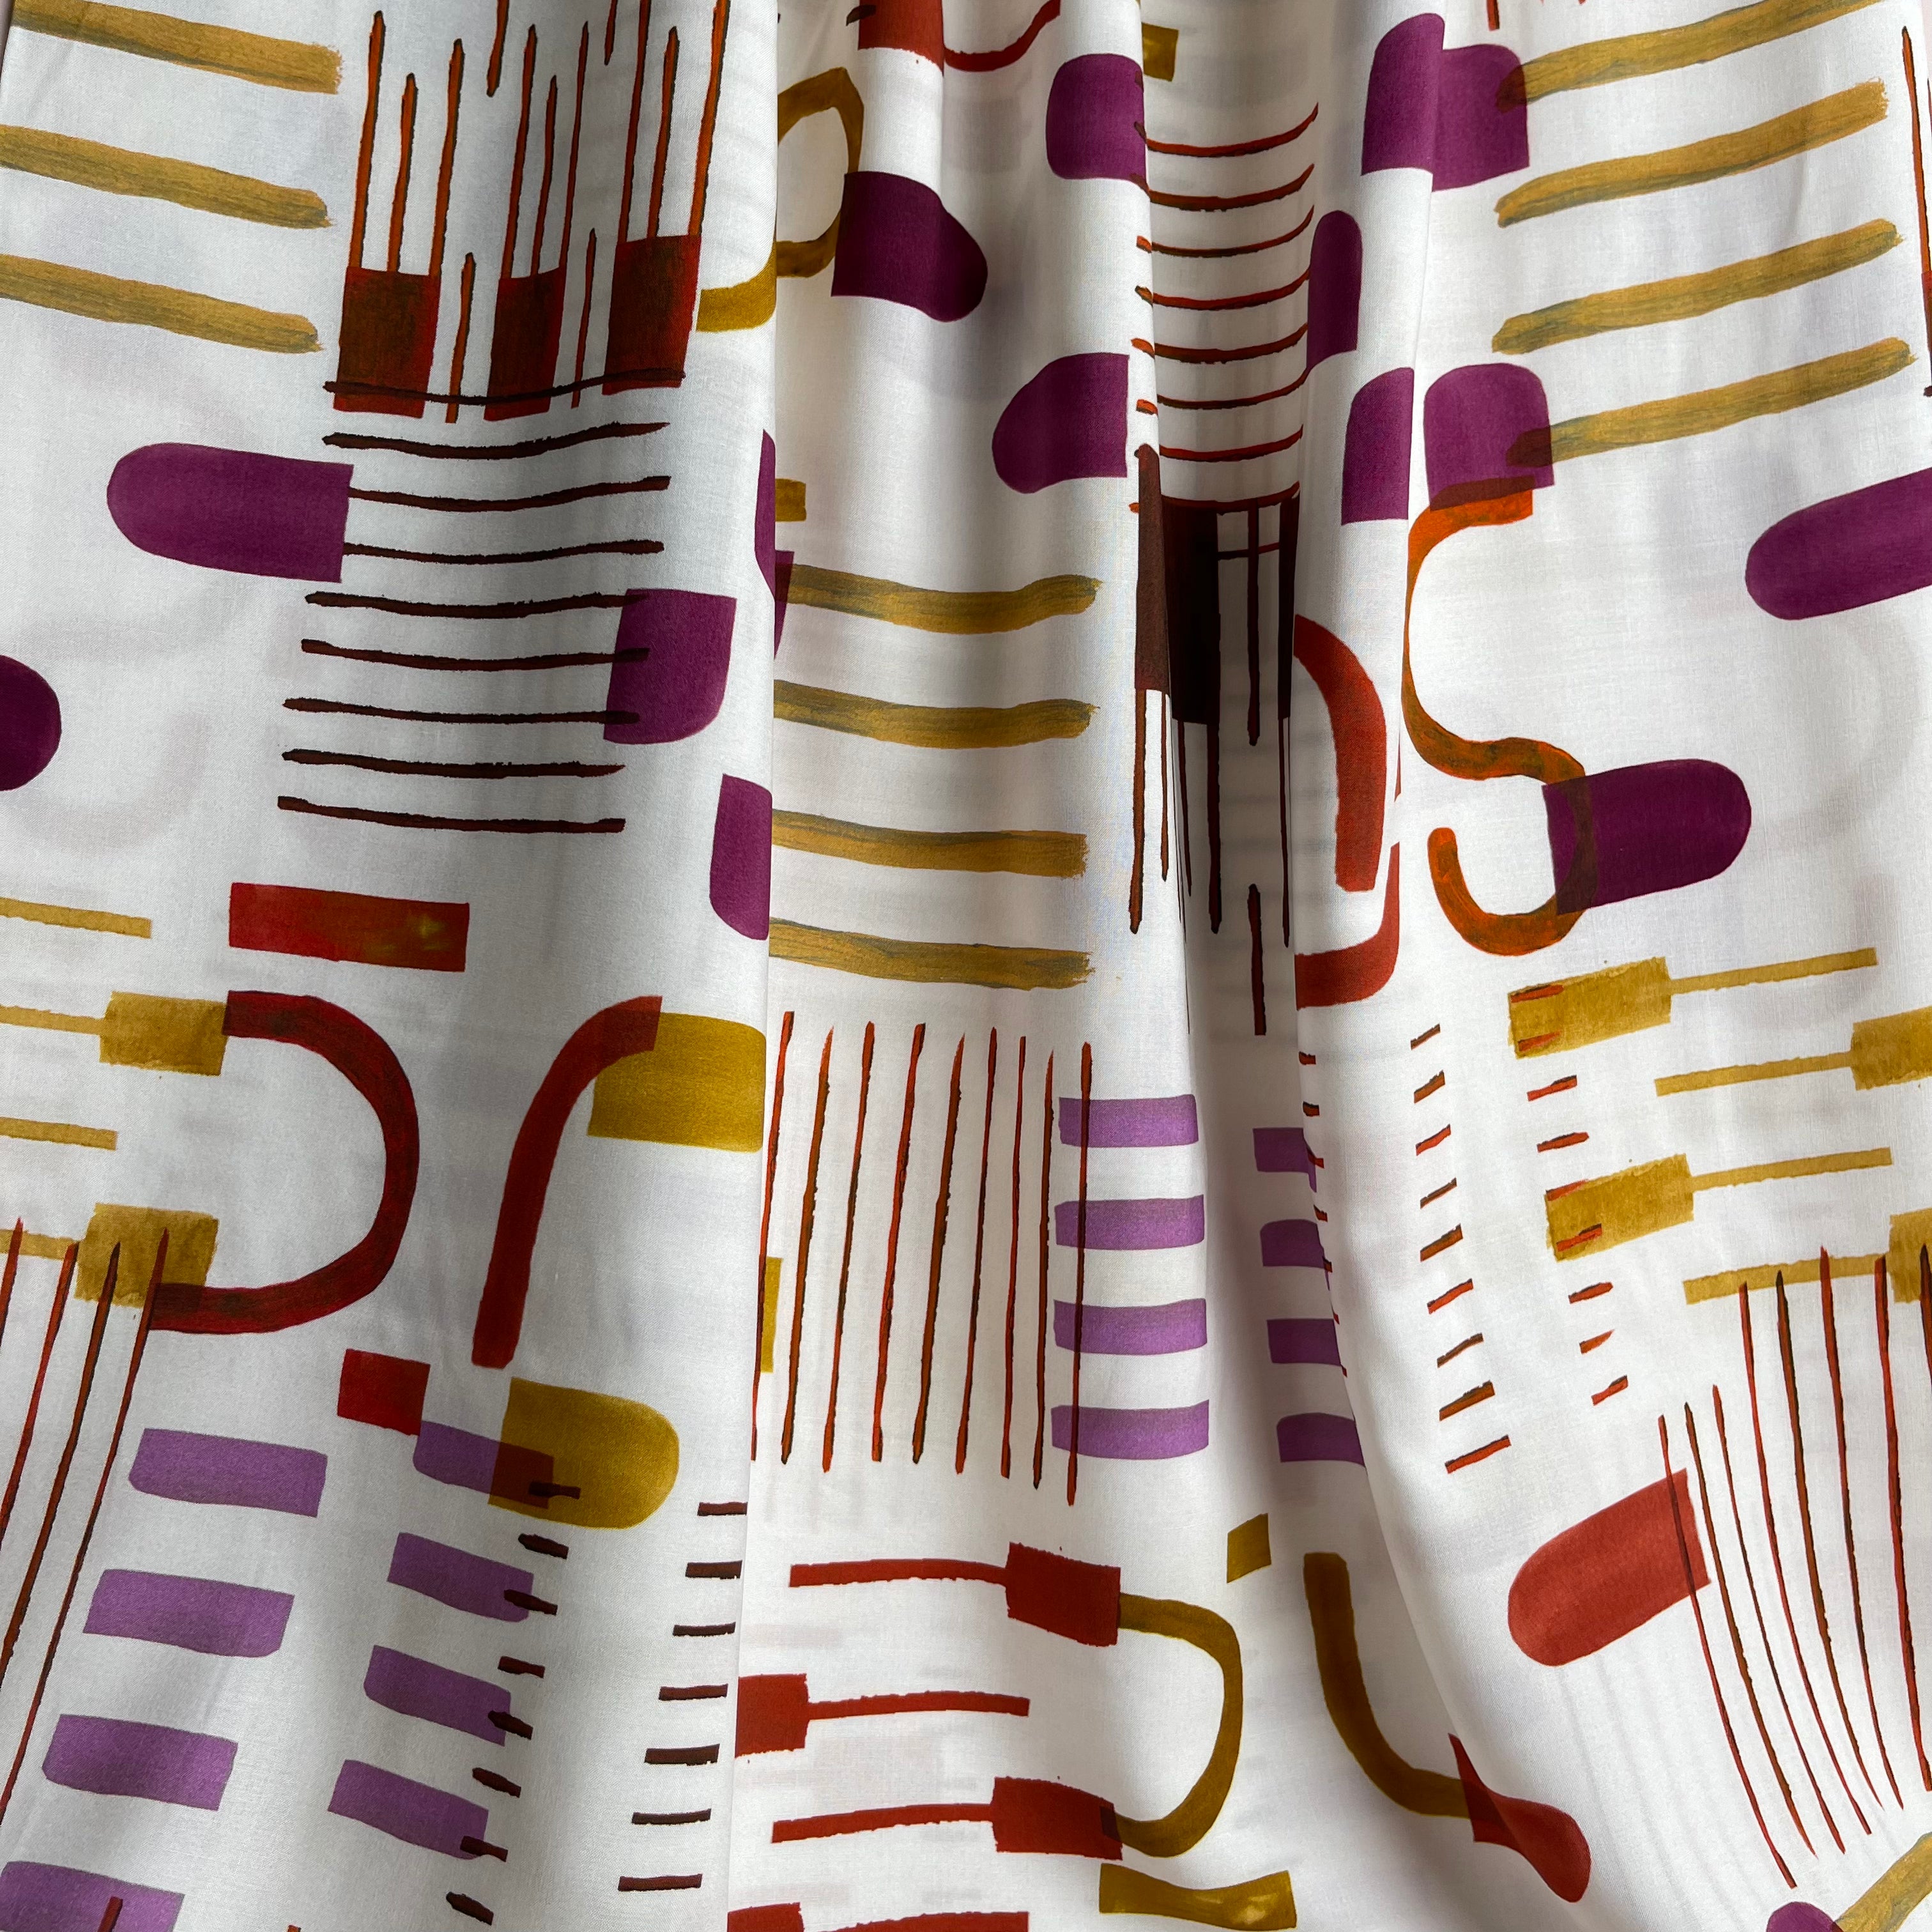 Atelier Jupe - Small Abstract Print Viscose Fabric